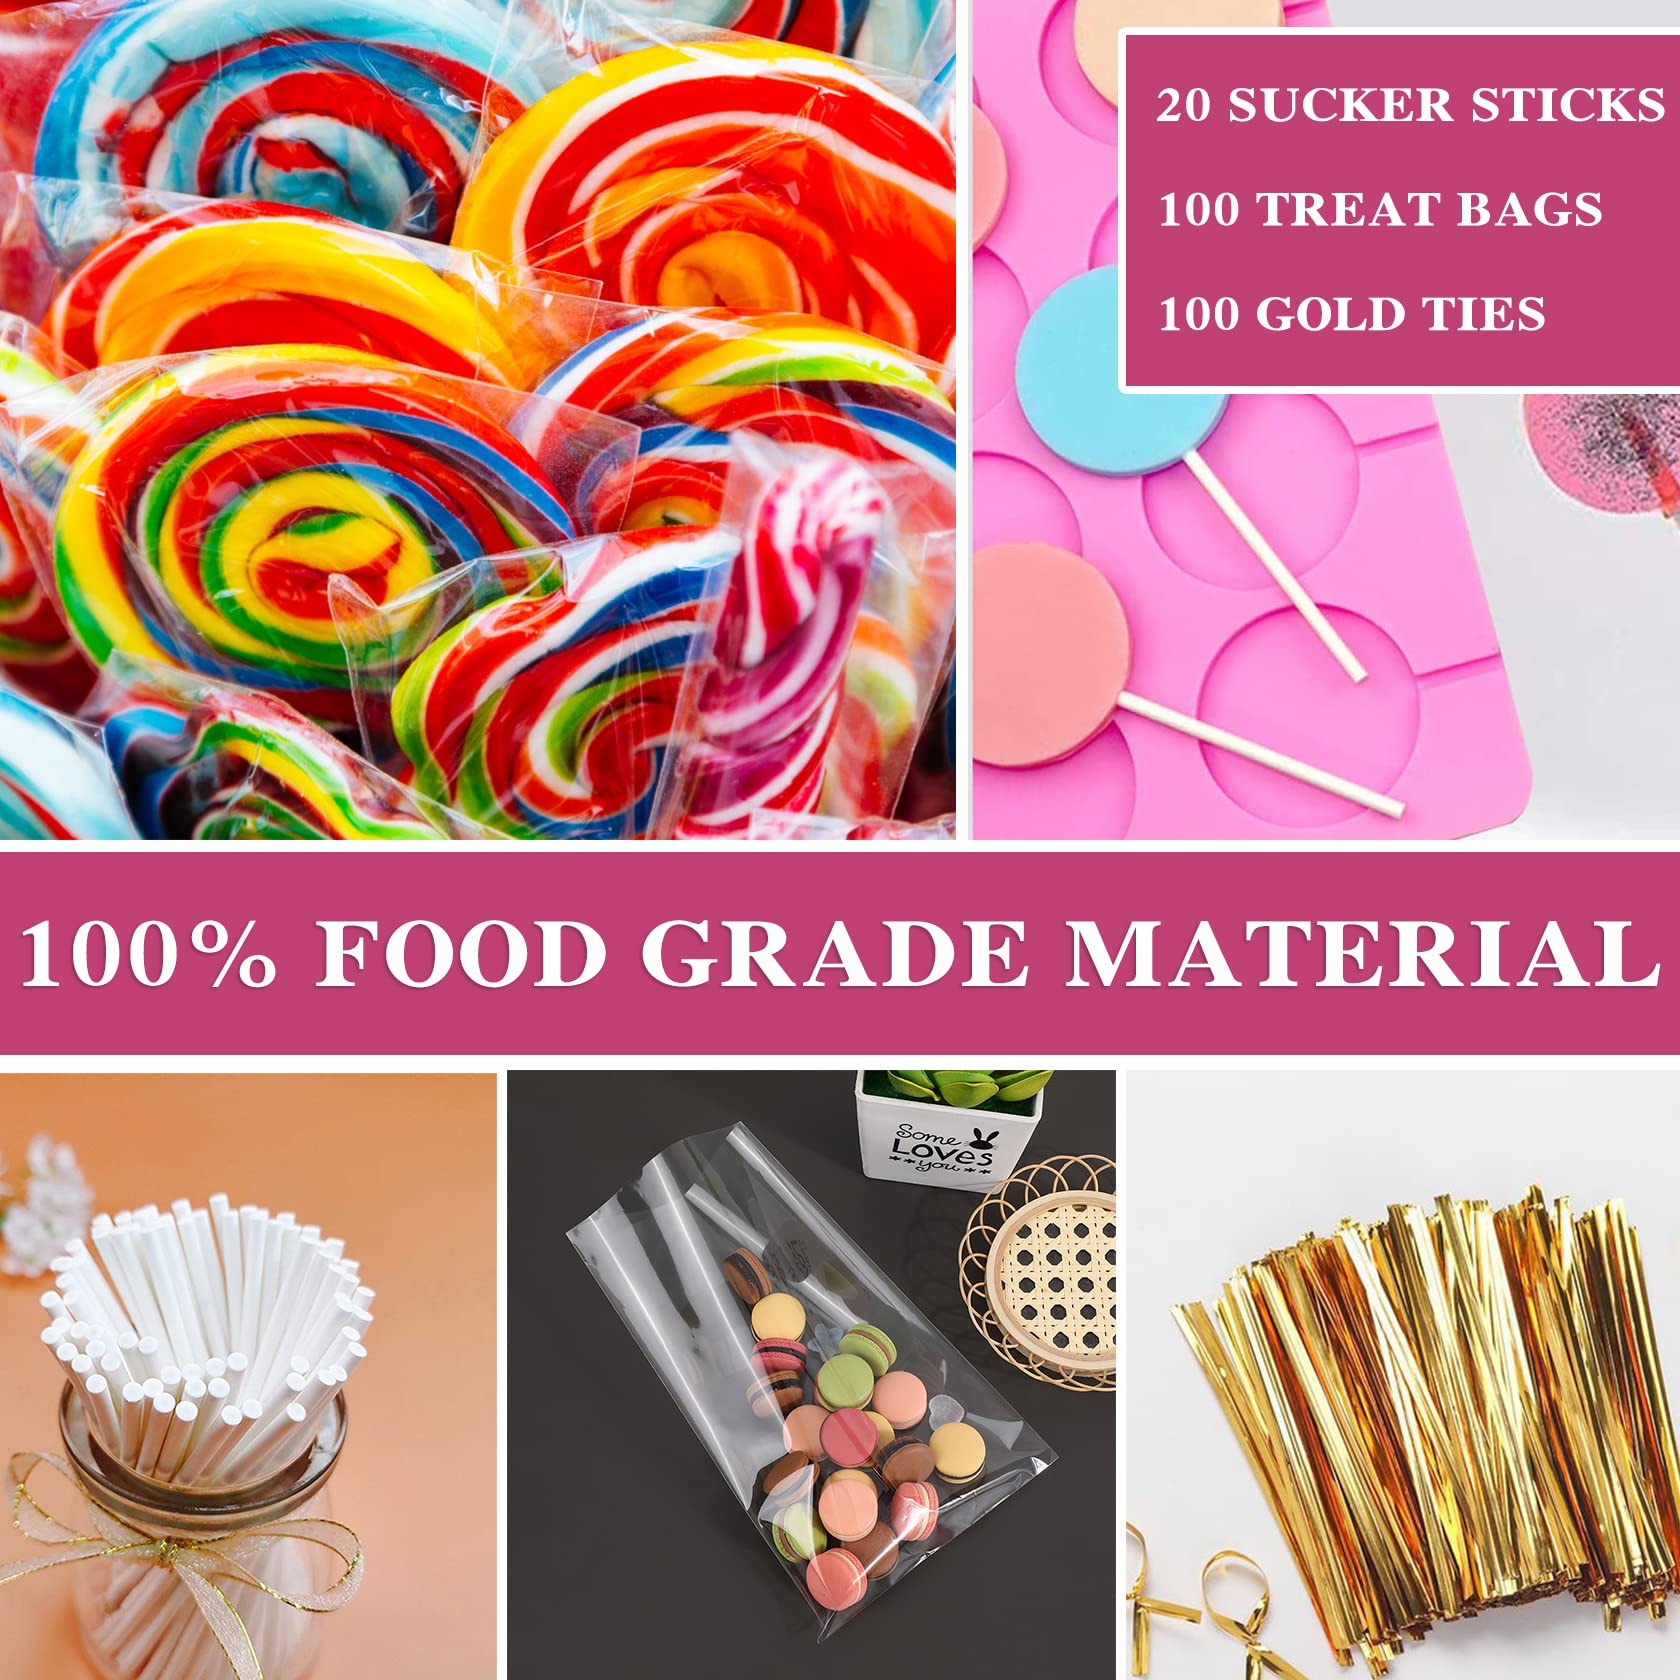 Fusang 2Pcs 8 Capacity Silicone Lollipop Molds,Hard Candy Chocolate Sucker Mold with 20pcs 3.15 inch Lollypop Sucker Sticks,100pcs Candy Treat Bags,100pcs Gold Ties